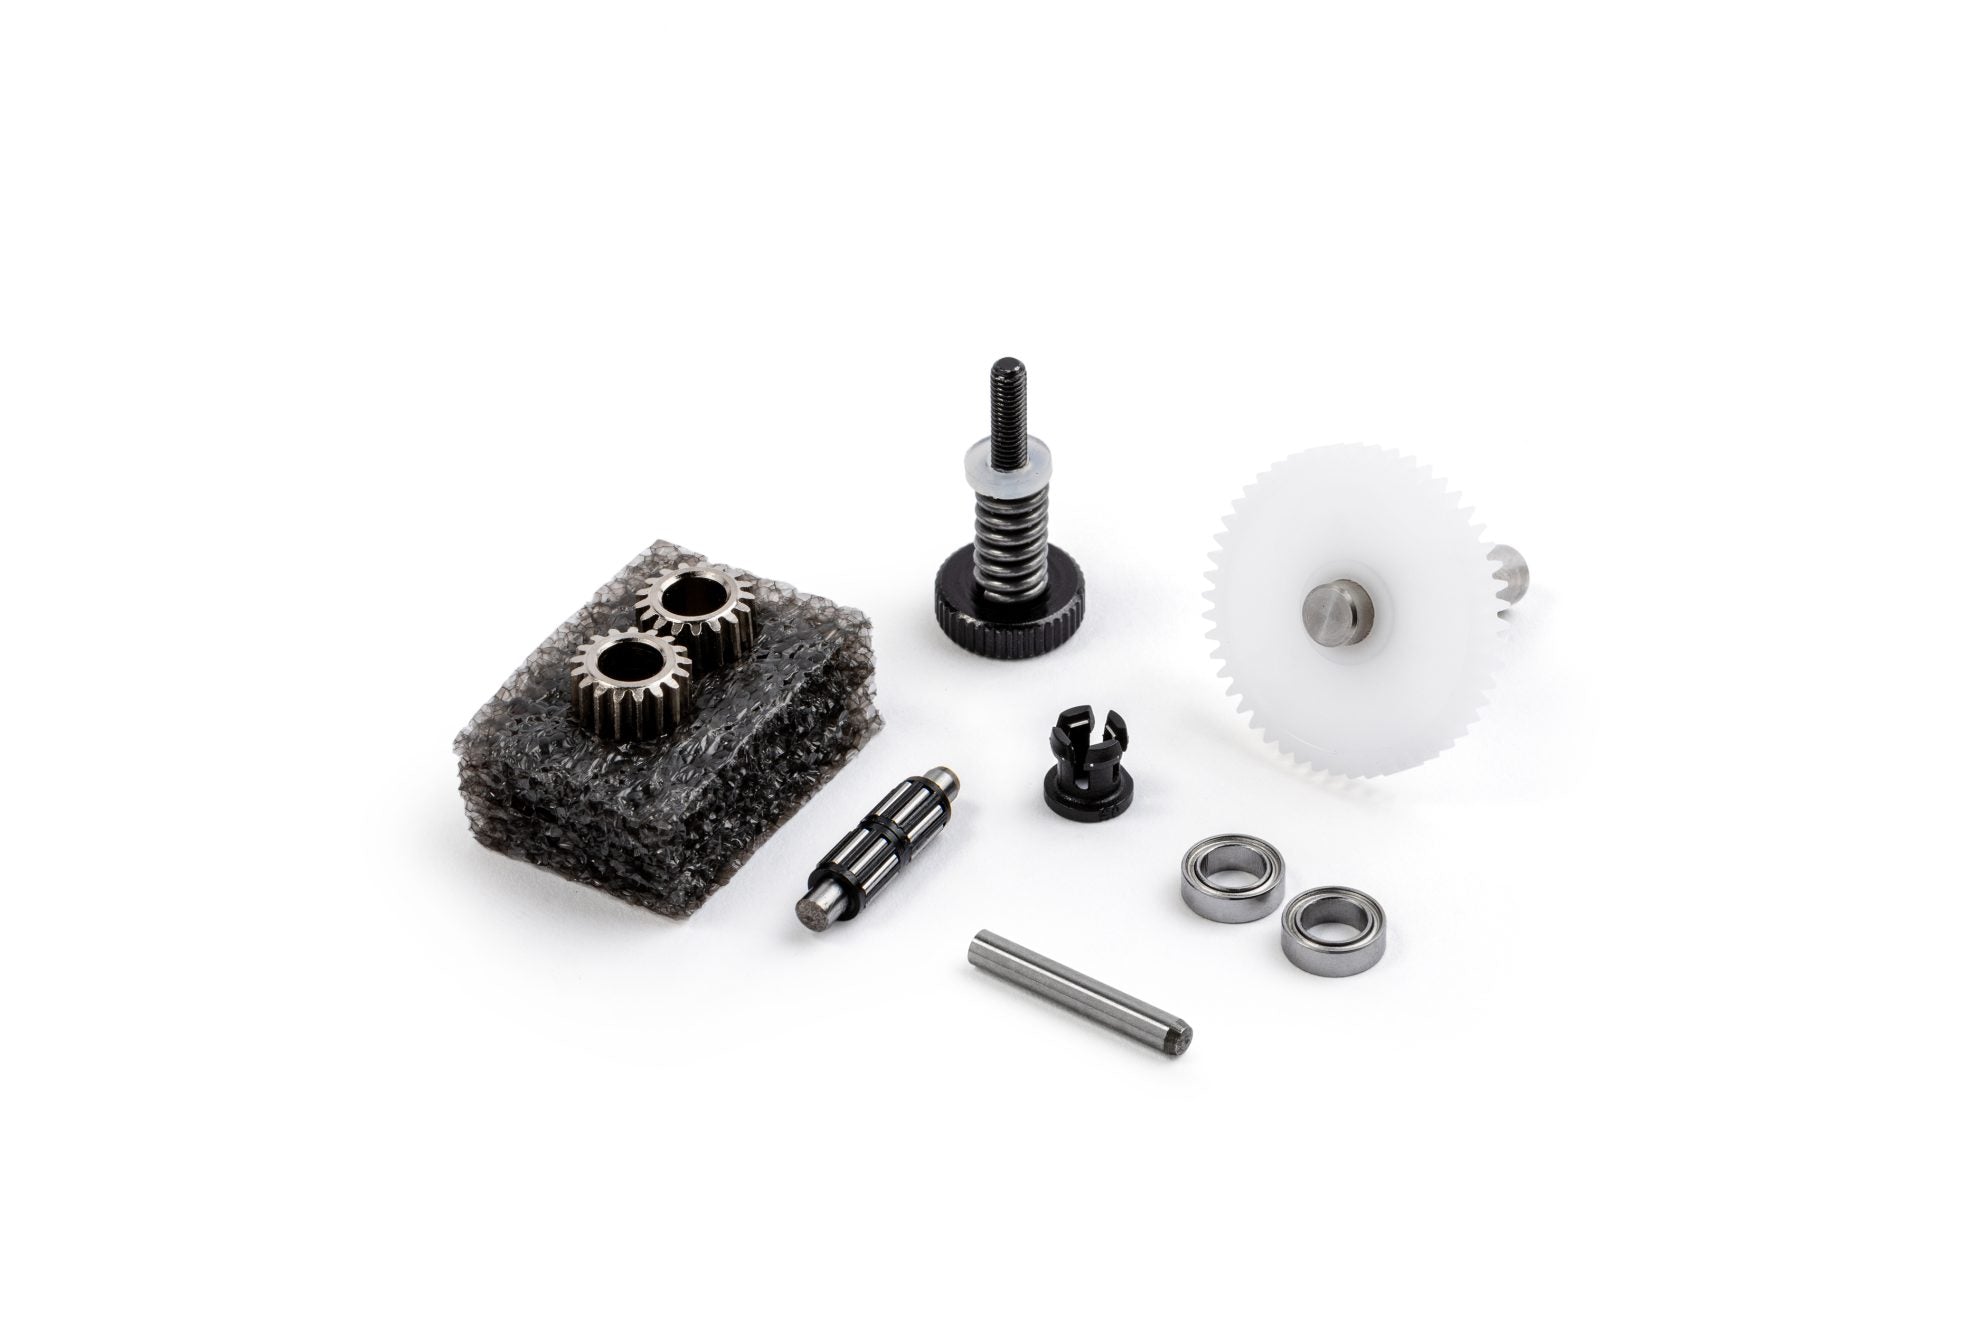 BMG IDGA Integrated Drive Gear Assembly Retro-fit Set